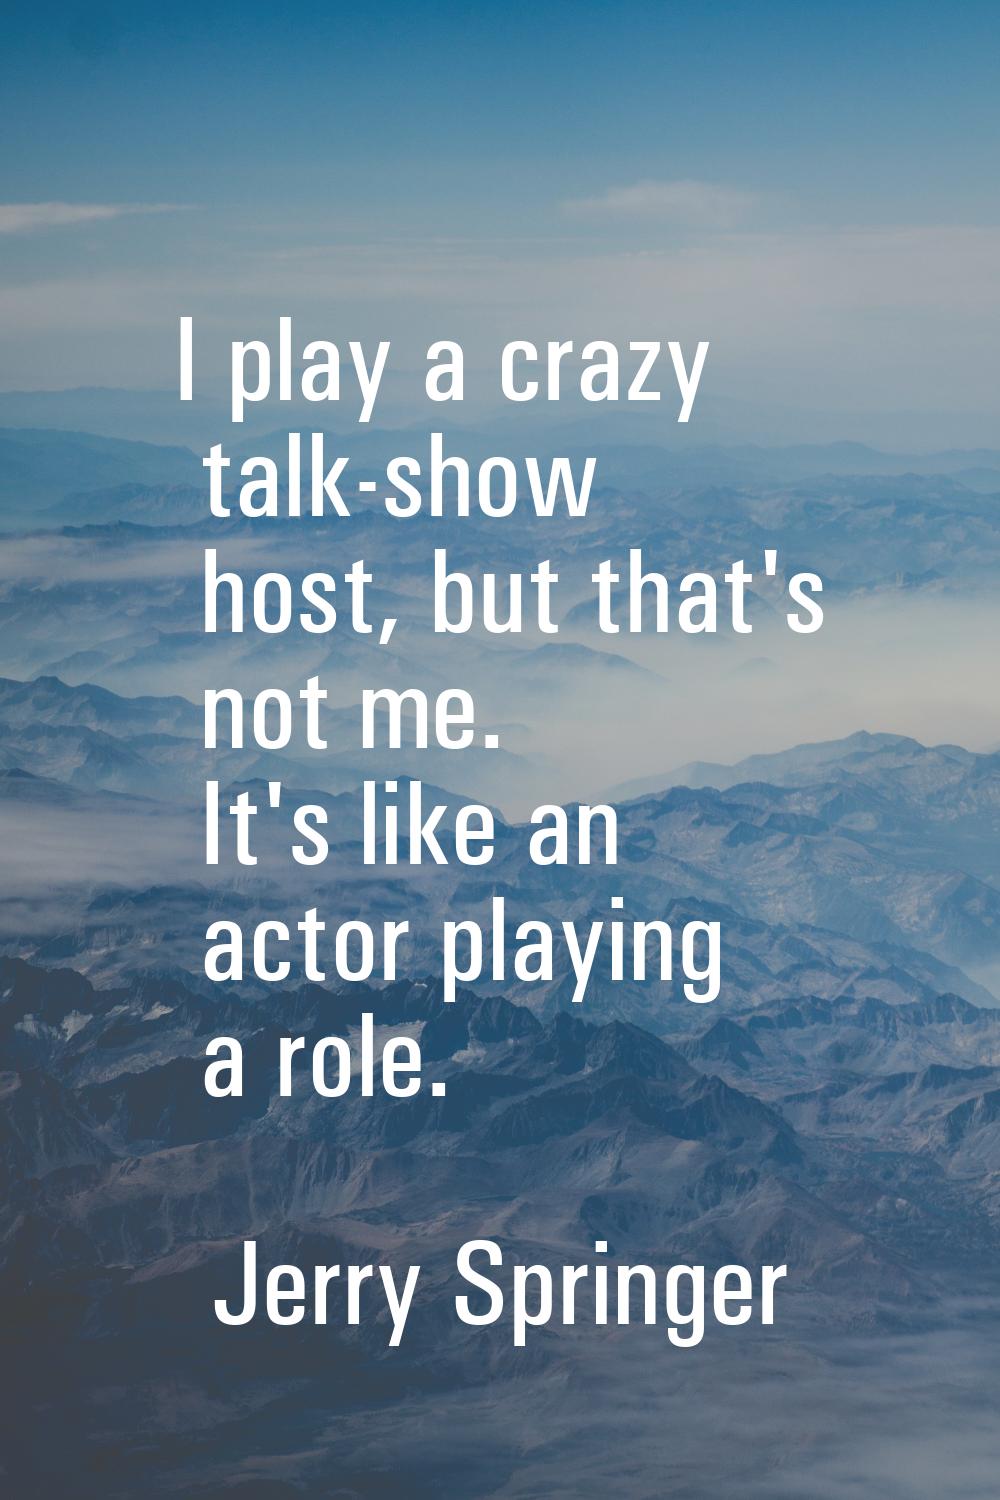 I play a crazy talk-show host, but that's not me. It's like an actor playing a role.